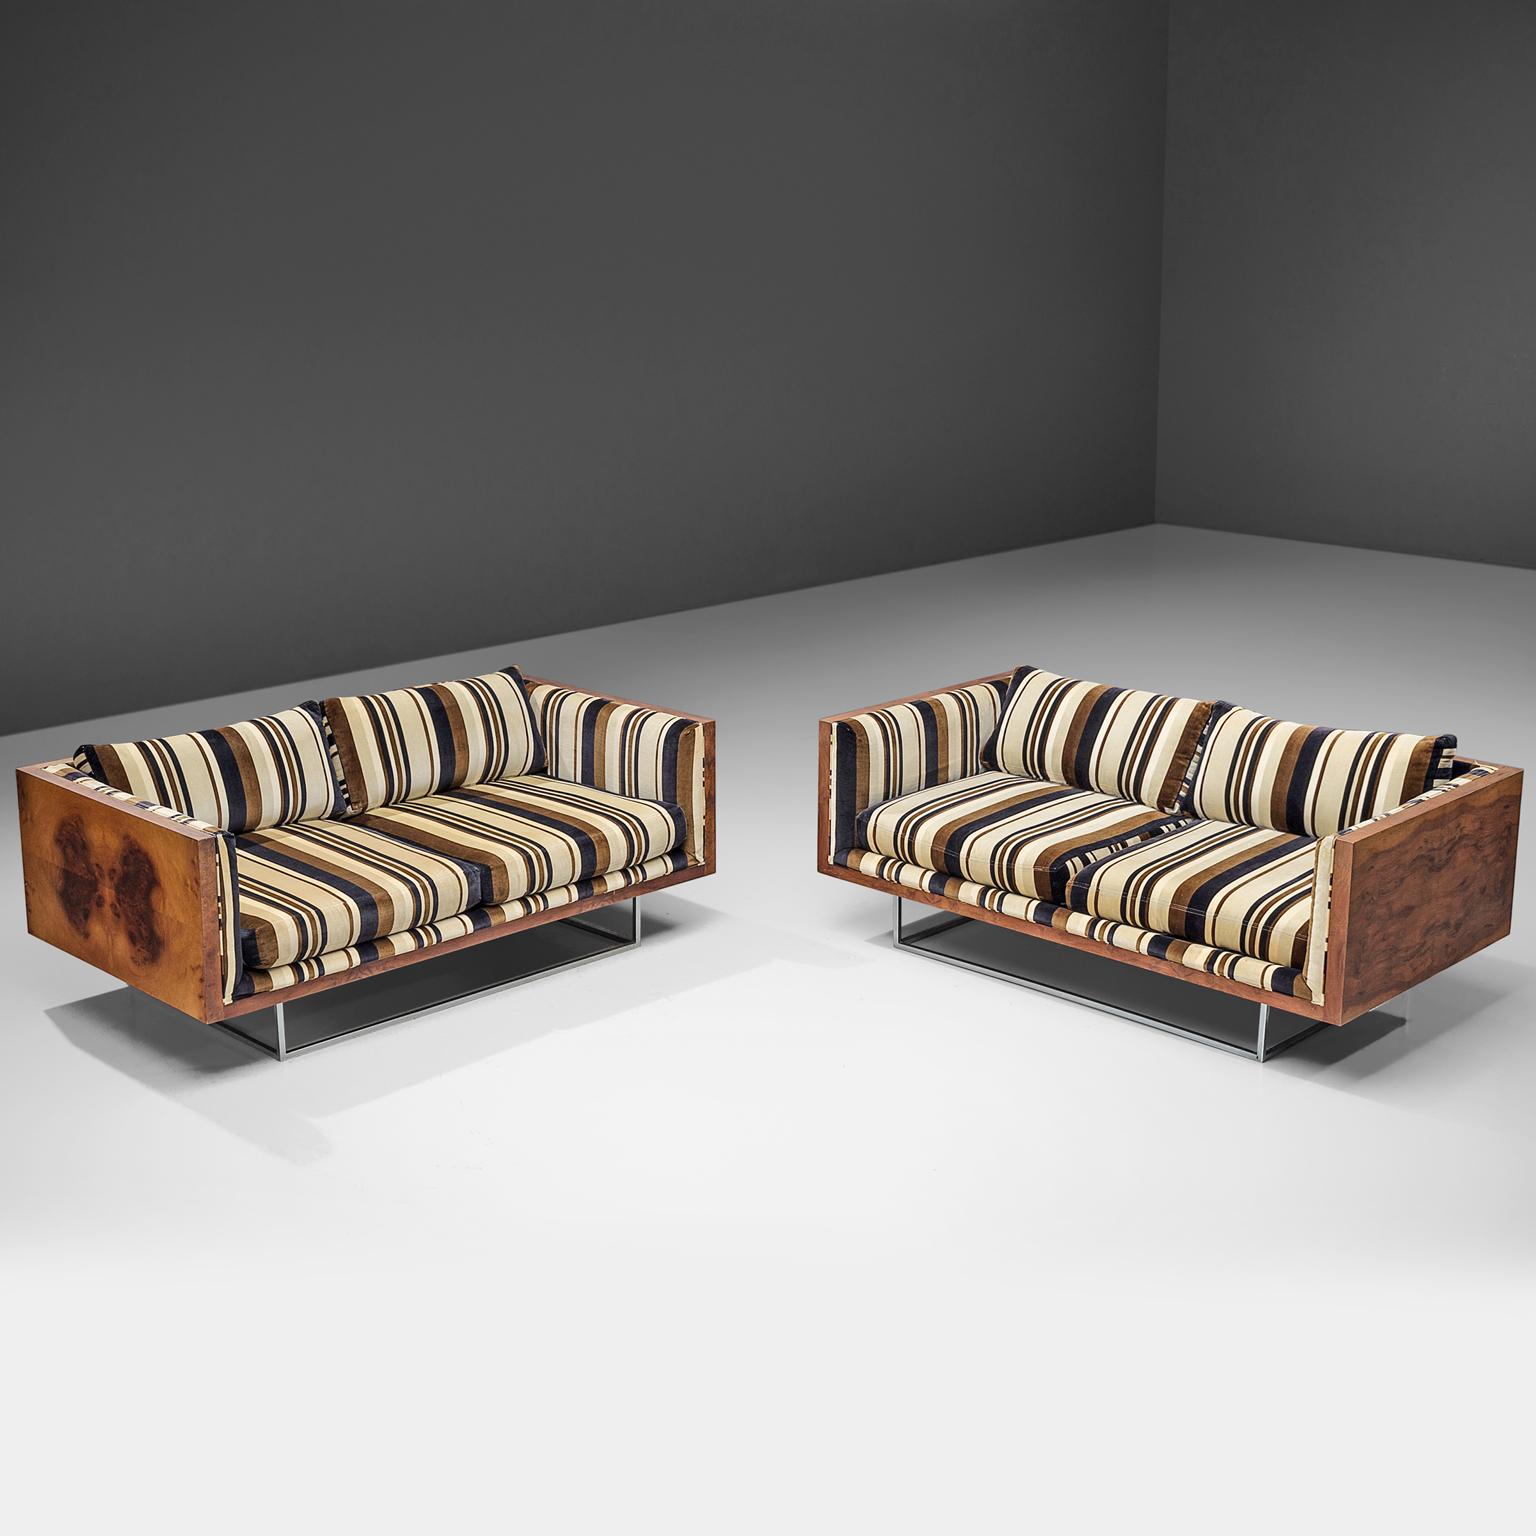 Milo Baughman for Thayer Coggin sofa in rosewood and striped velvet, United States, 1970s. 

These sofas made with rosewood sides don't go unnoticed as it attracts attention through it's stripy and different colored upholstery. These tuxedo sofas